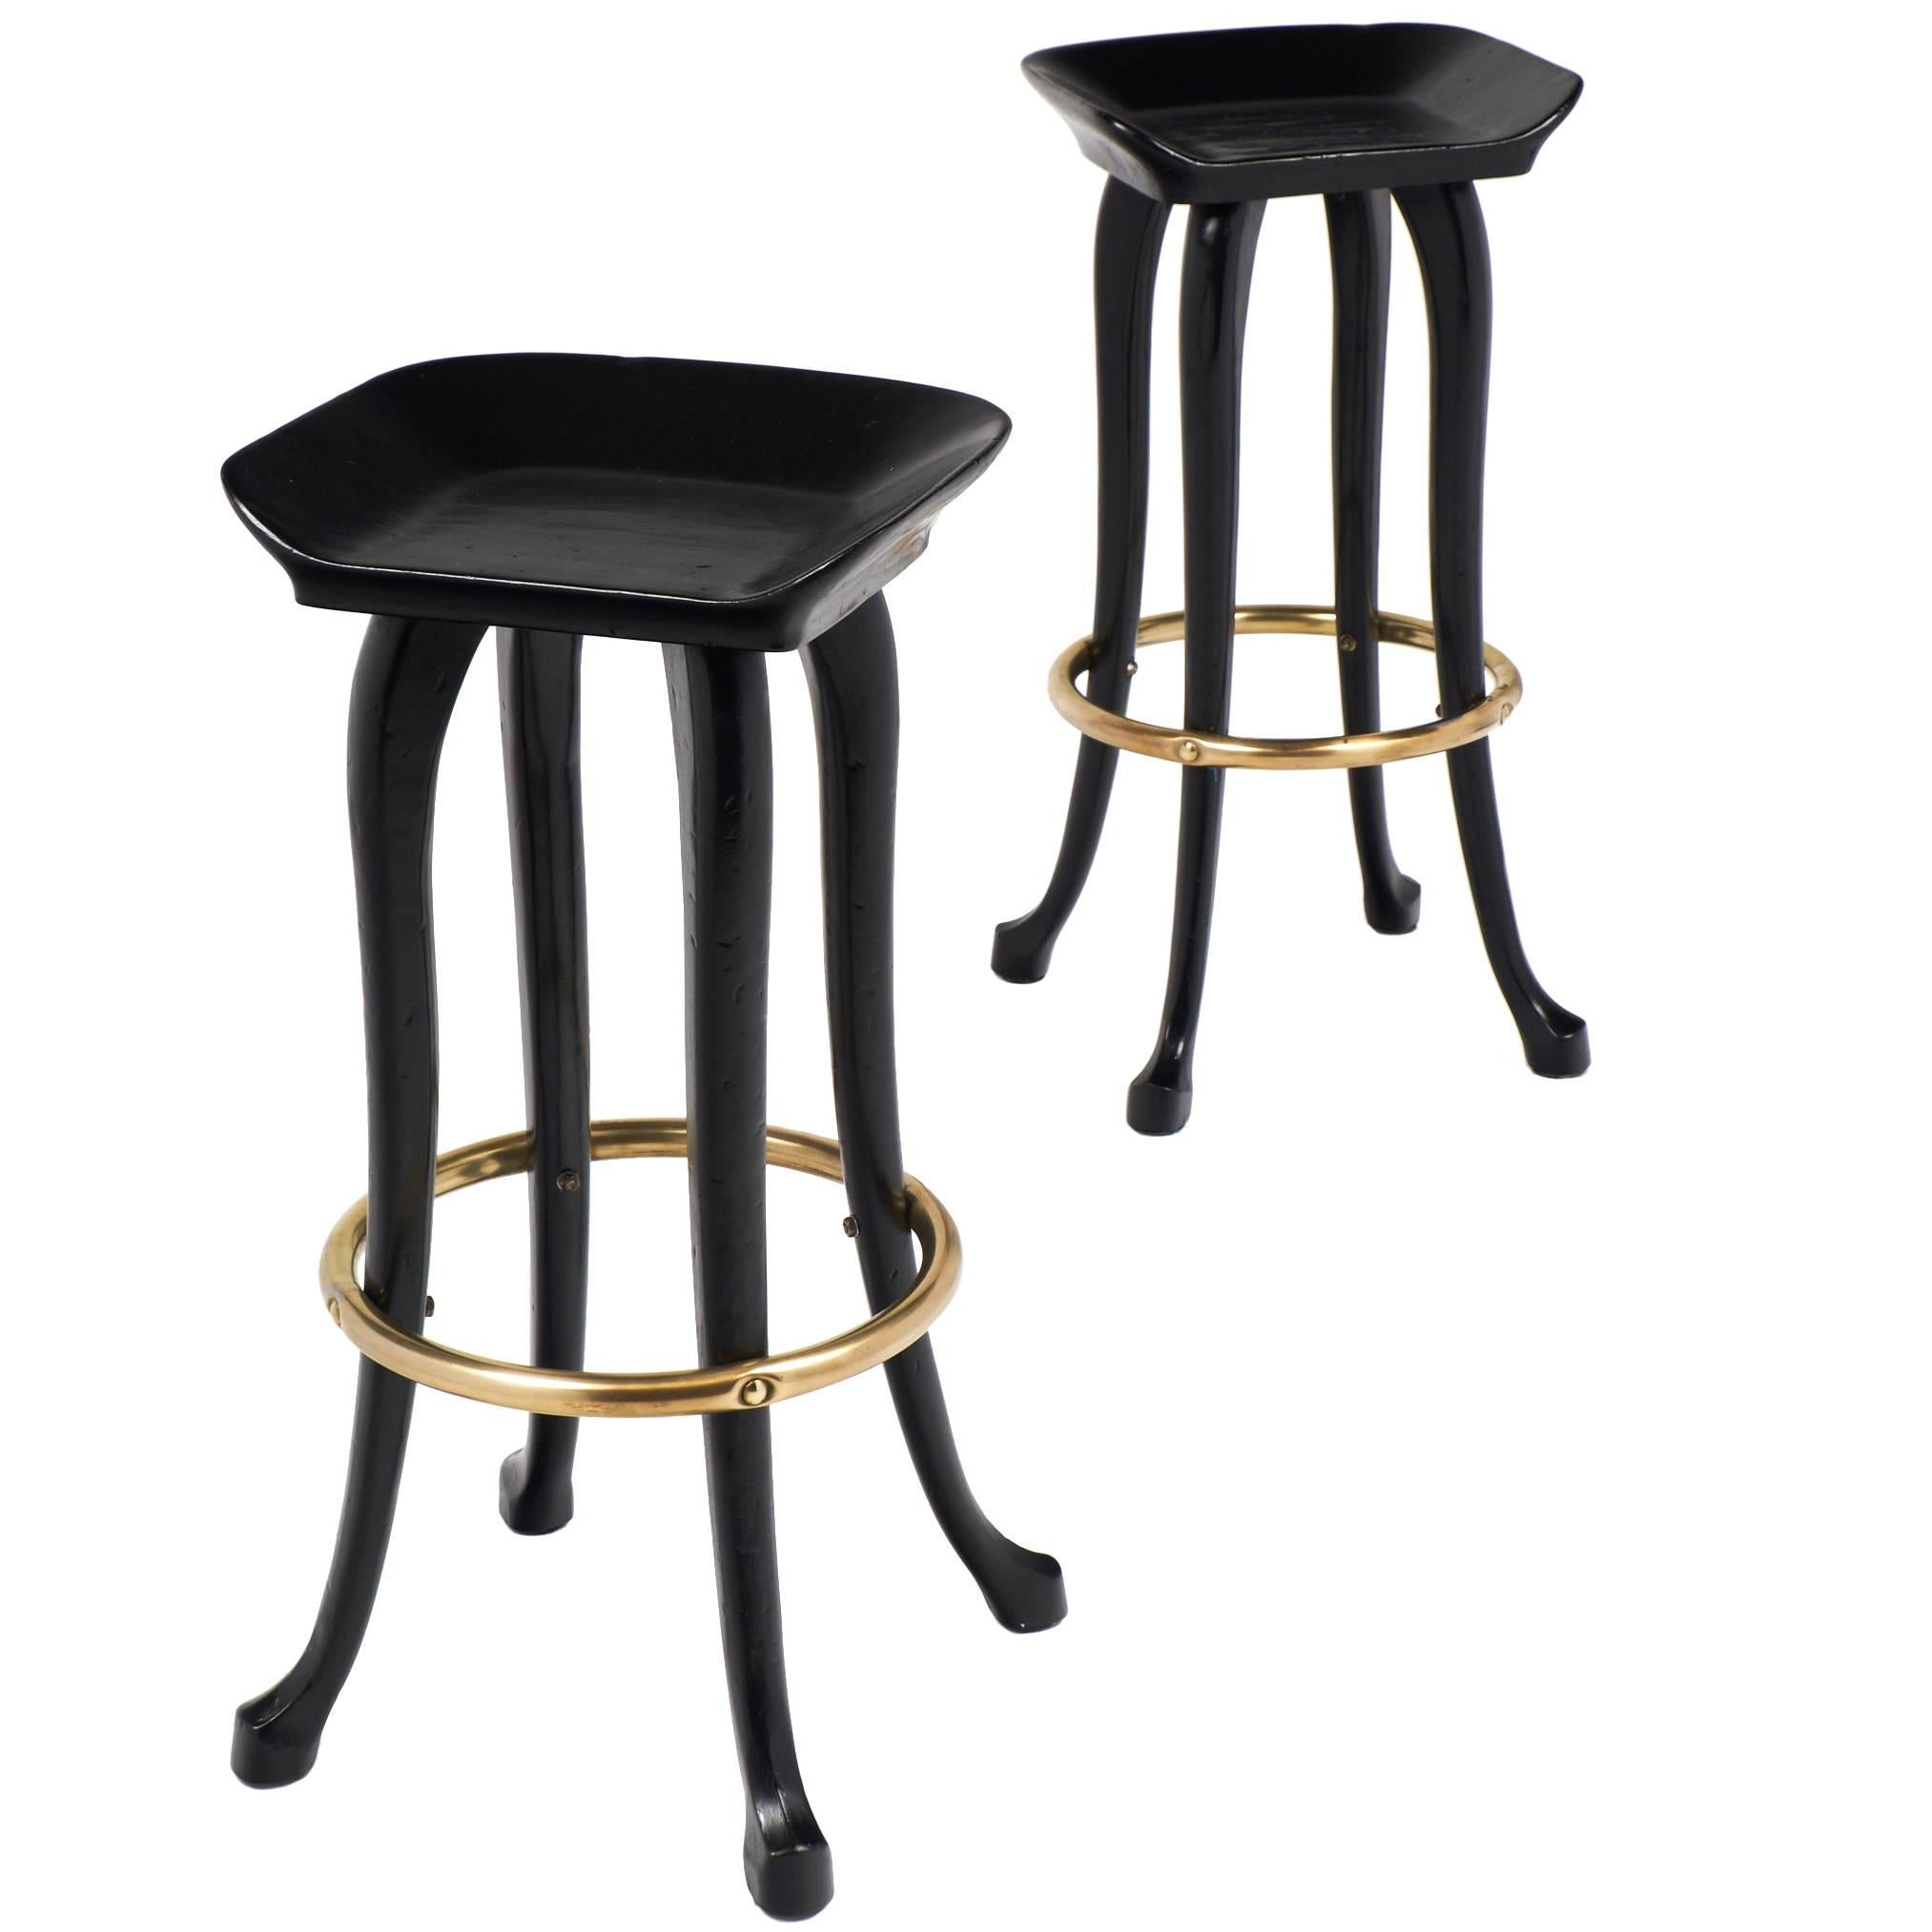 Pair of Vintage "Elephant" Stools with Brass Footrests